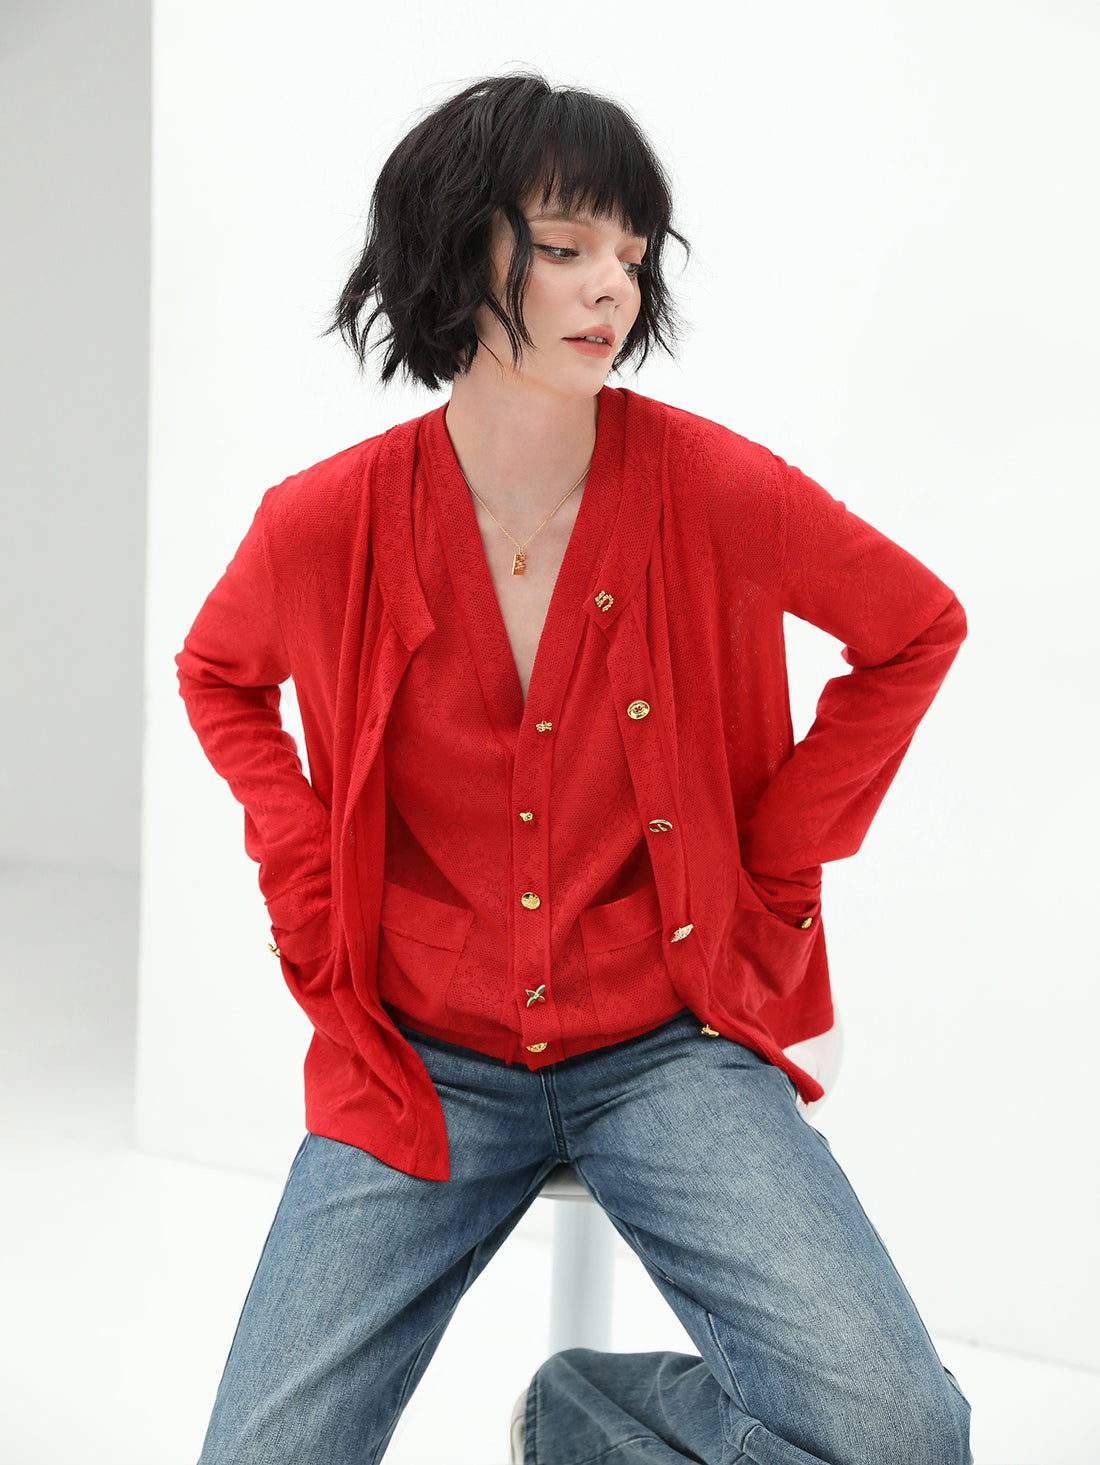 stylish-red-cardigan-with-gold-snap-buttons_all_red_1.jpg